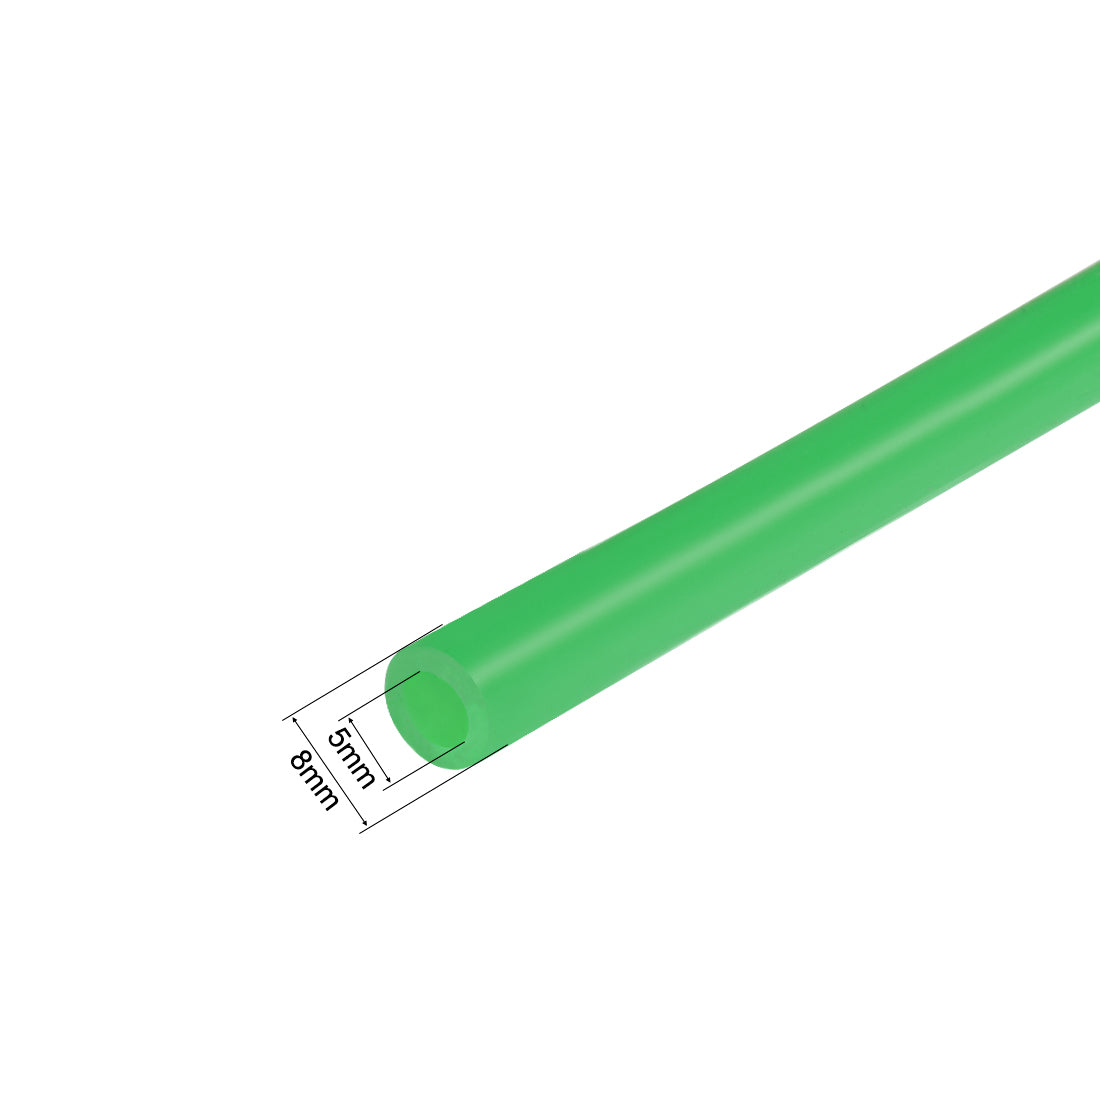 Uxcell Uxcell Silicone Tube, 4mm ID x 6mm OD 1m/3.3ft  Tubing Green